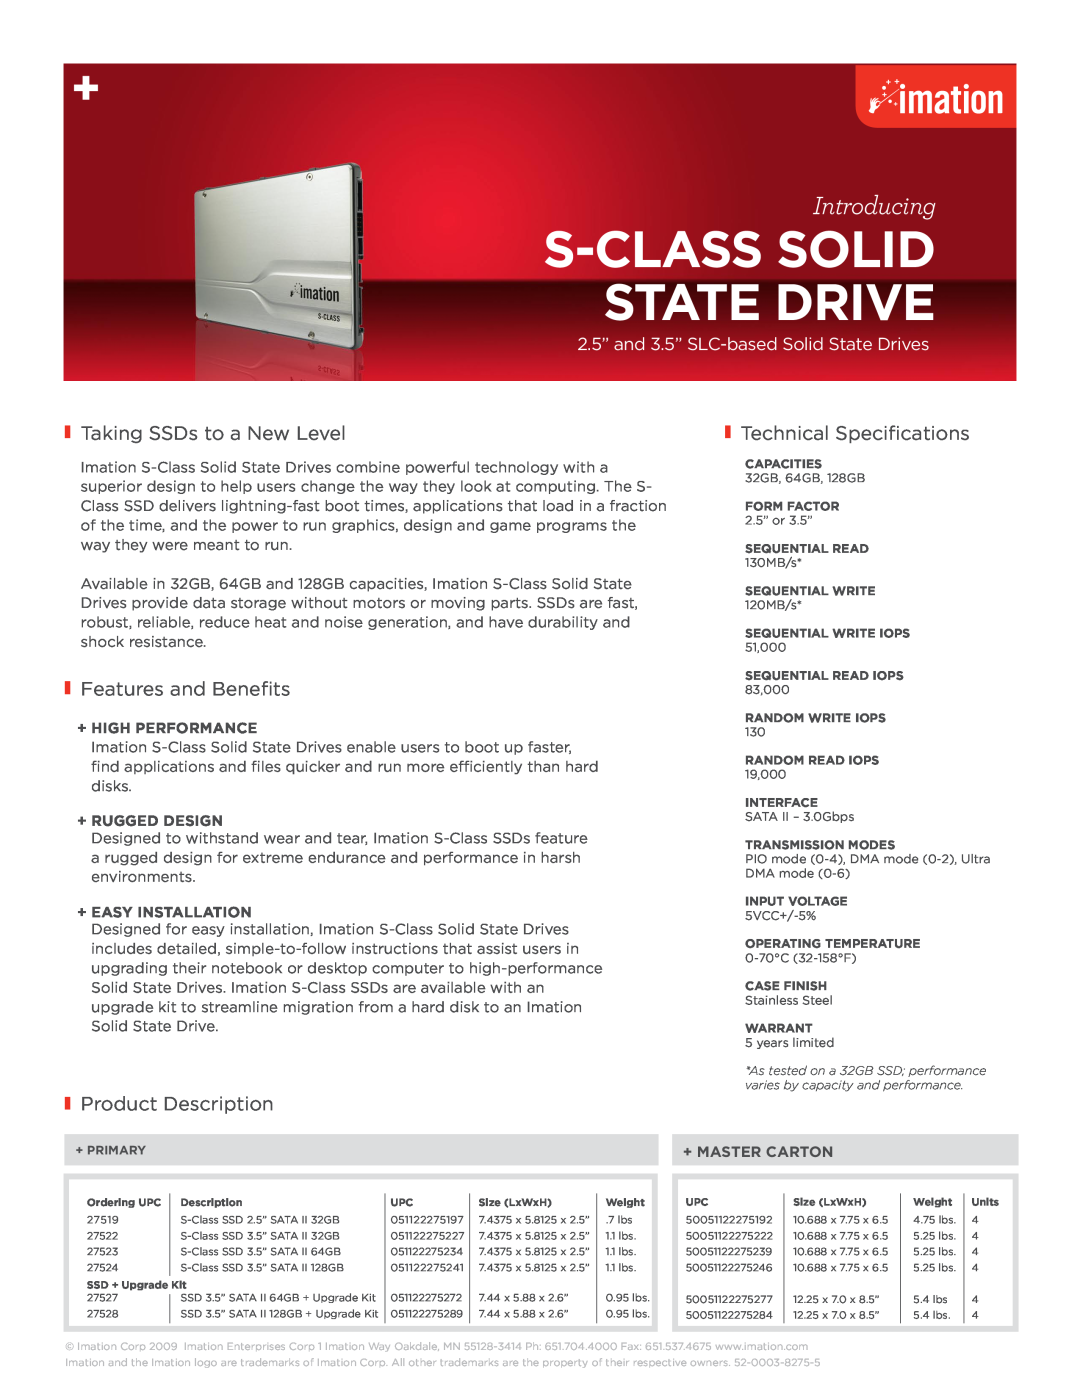 Imation manual S-Class Solid State Drive, Introducing, Taking SSDs to a New Level, Technical Specifications 